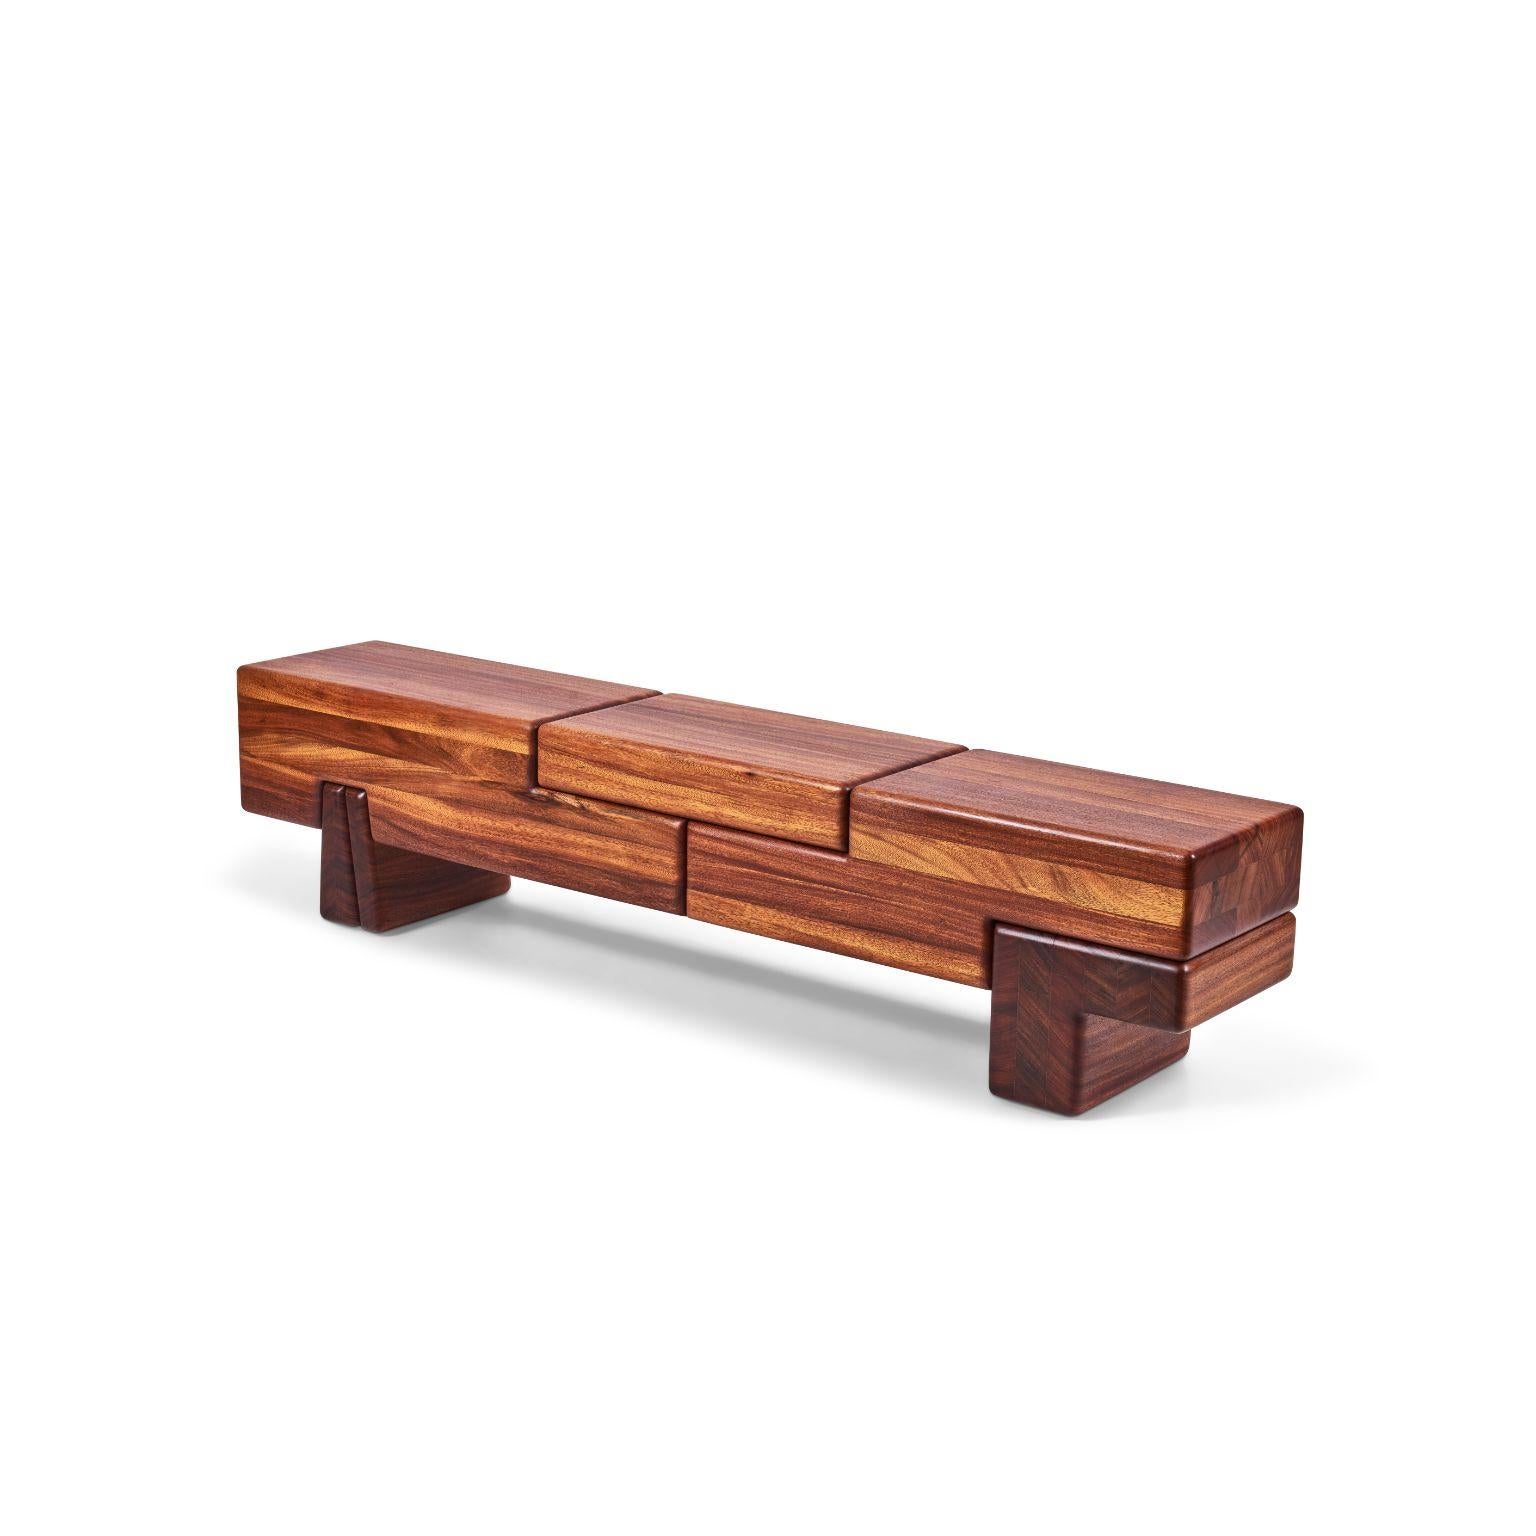 Okan D'arfique Laminated Bench by Contemporary Ecowood In New Condition For Sale In Geneve, CH